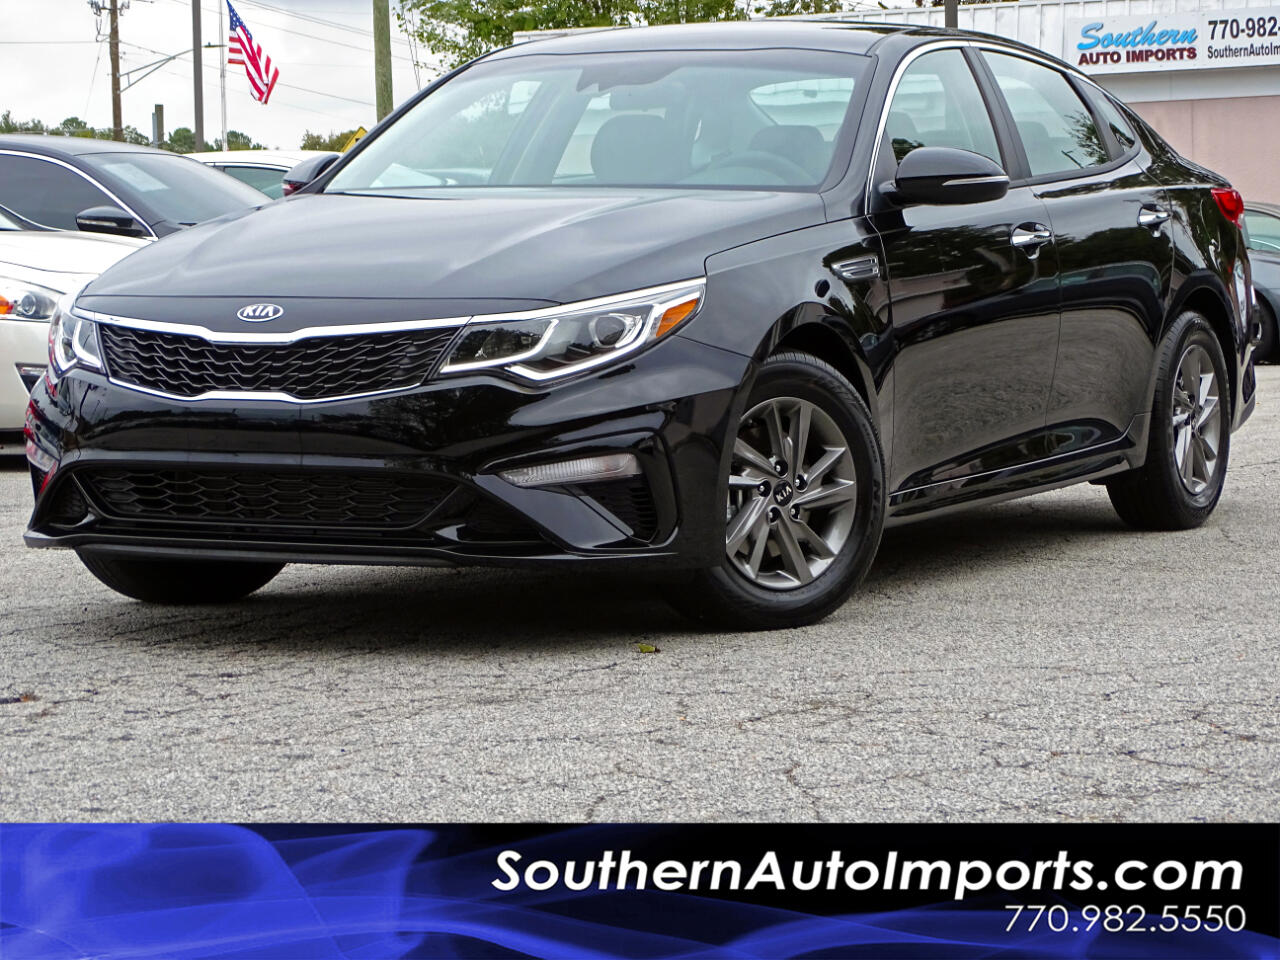 Used 2019 Kia Optima Lx W Back Up Cam 1 Owner For Sale In